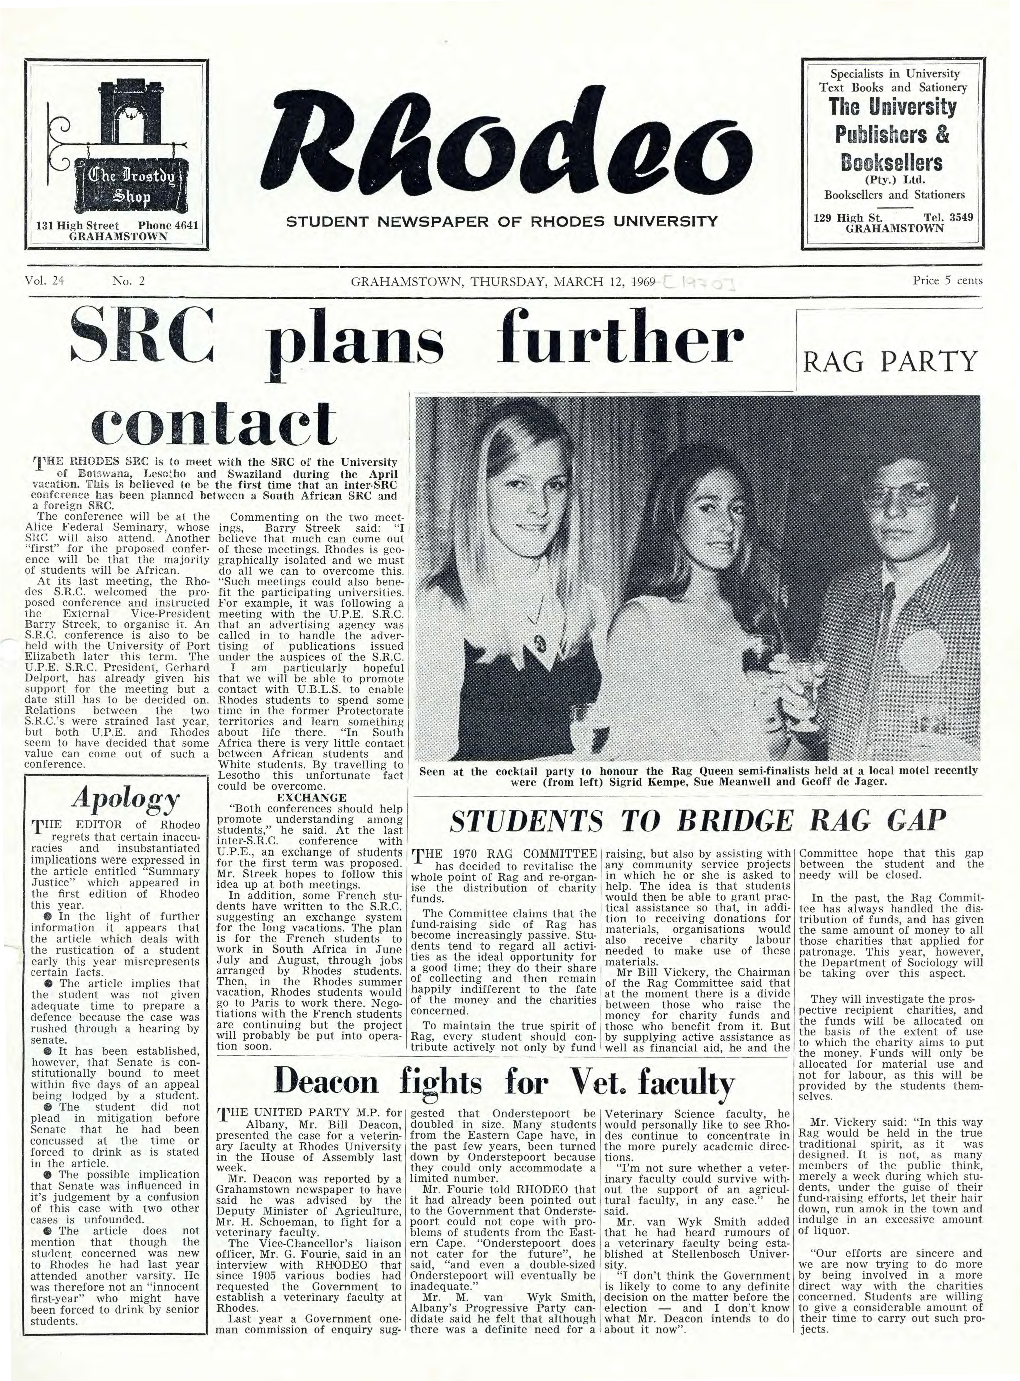 SRC Plans Contact Further